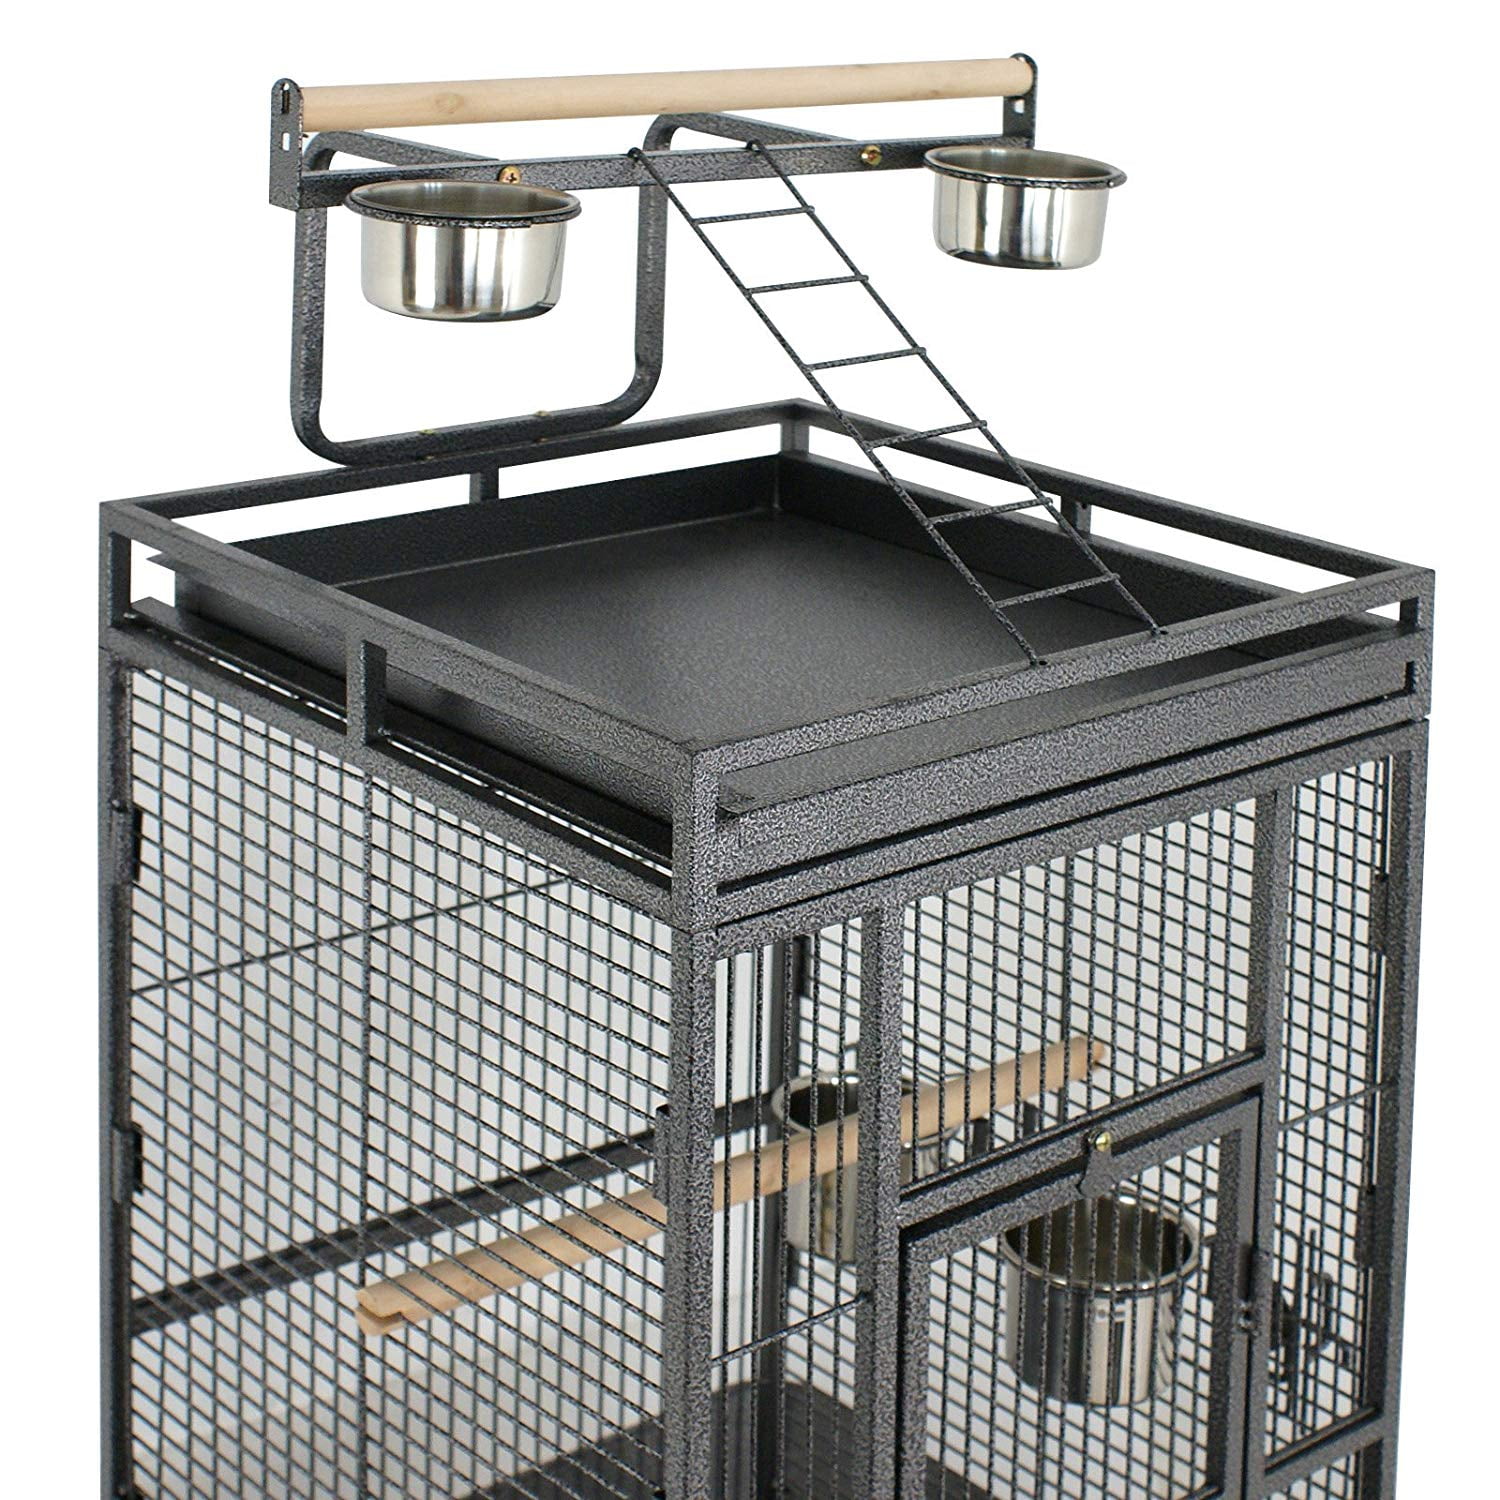 Super Deal 53/61/68 Large Bird Cage Play Top Parrot Chinchilla Cage Macaw Cockatiel Cockatoo Pet House 